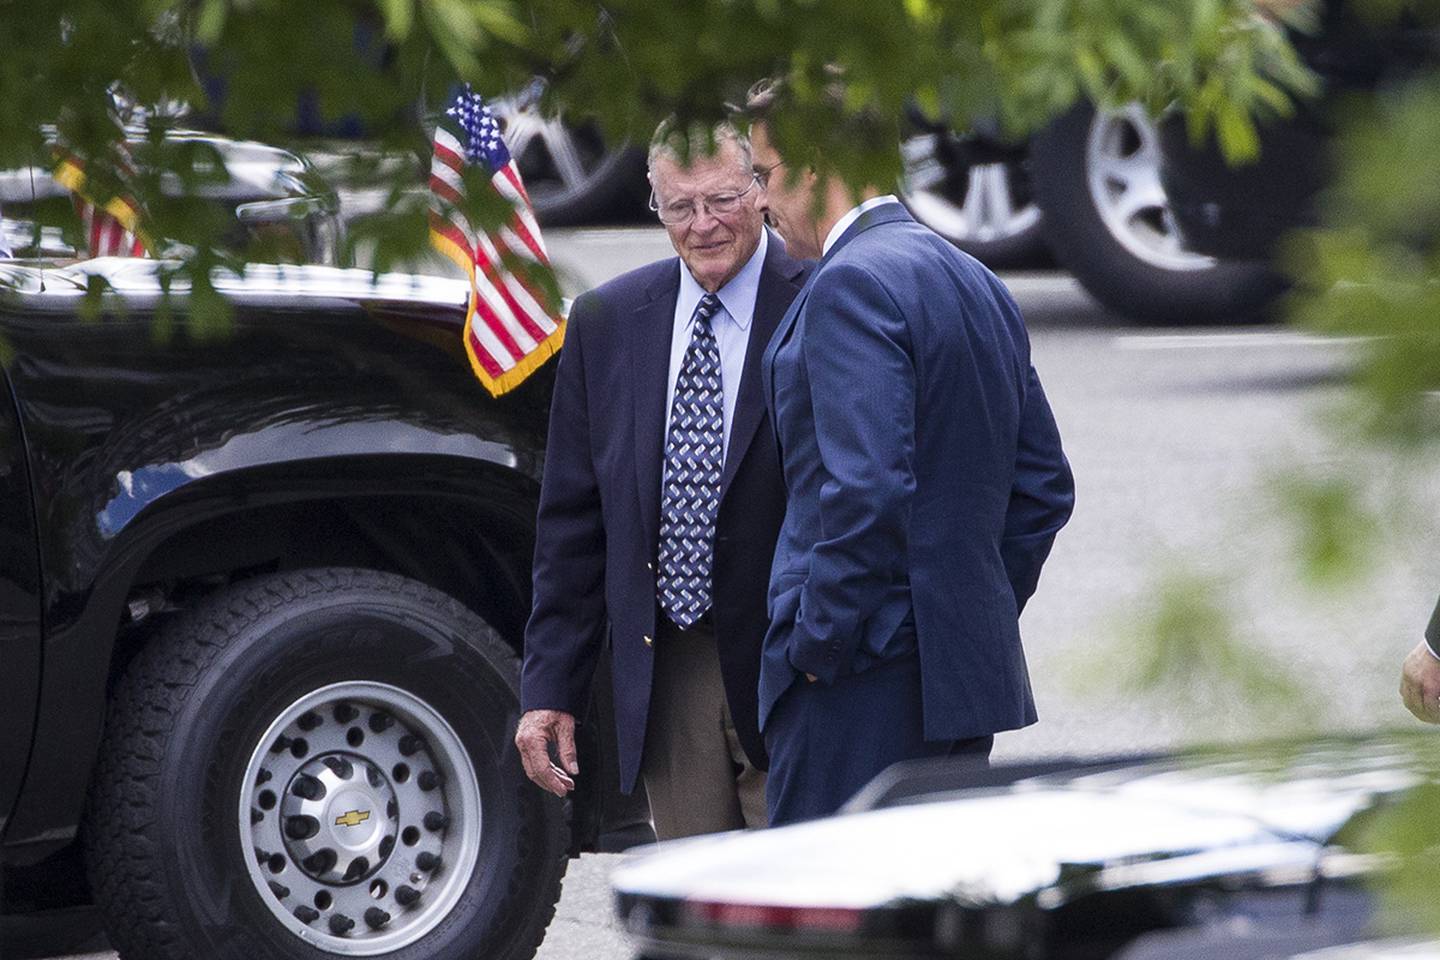 Chairman of the Senate Armed Services Committee Jim Inhofe, R-Okla., left, talks with incoming acting Defense Secretary Mark Esper, as they arrive for a meeting with President Donald Trump about Iran at the White House